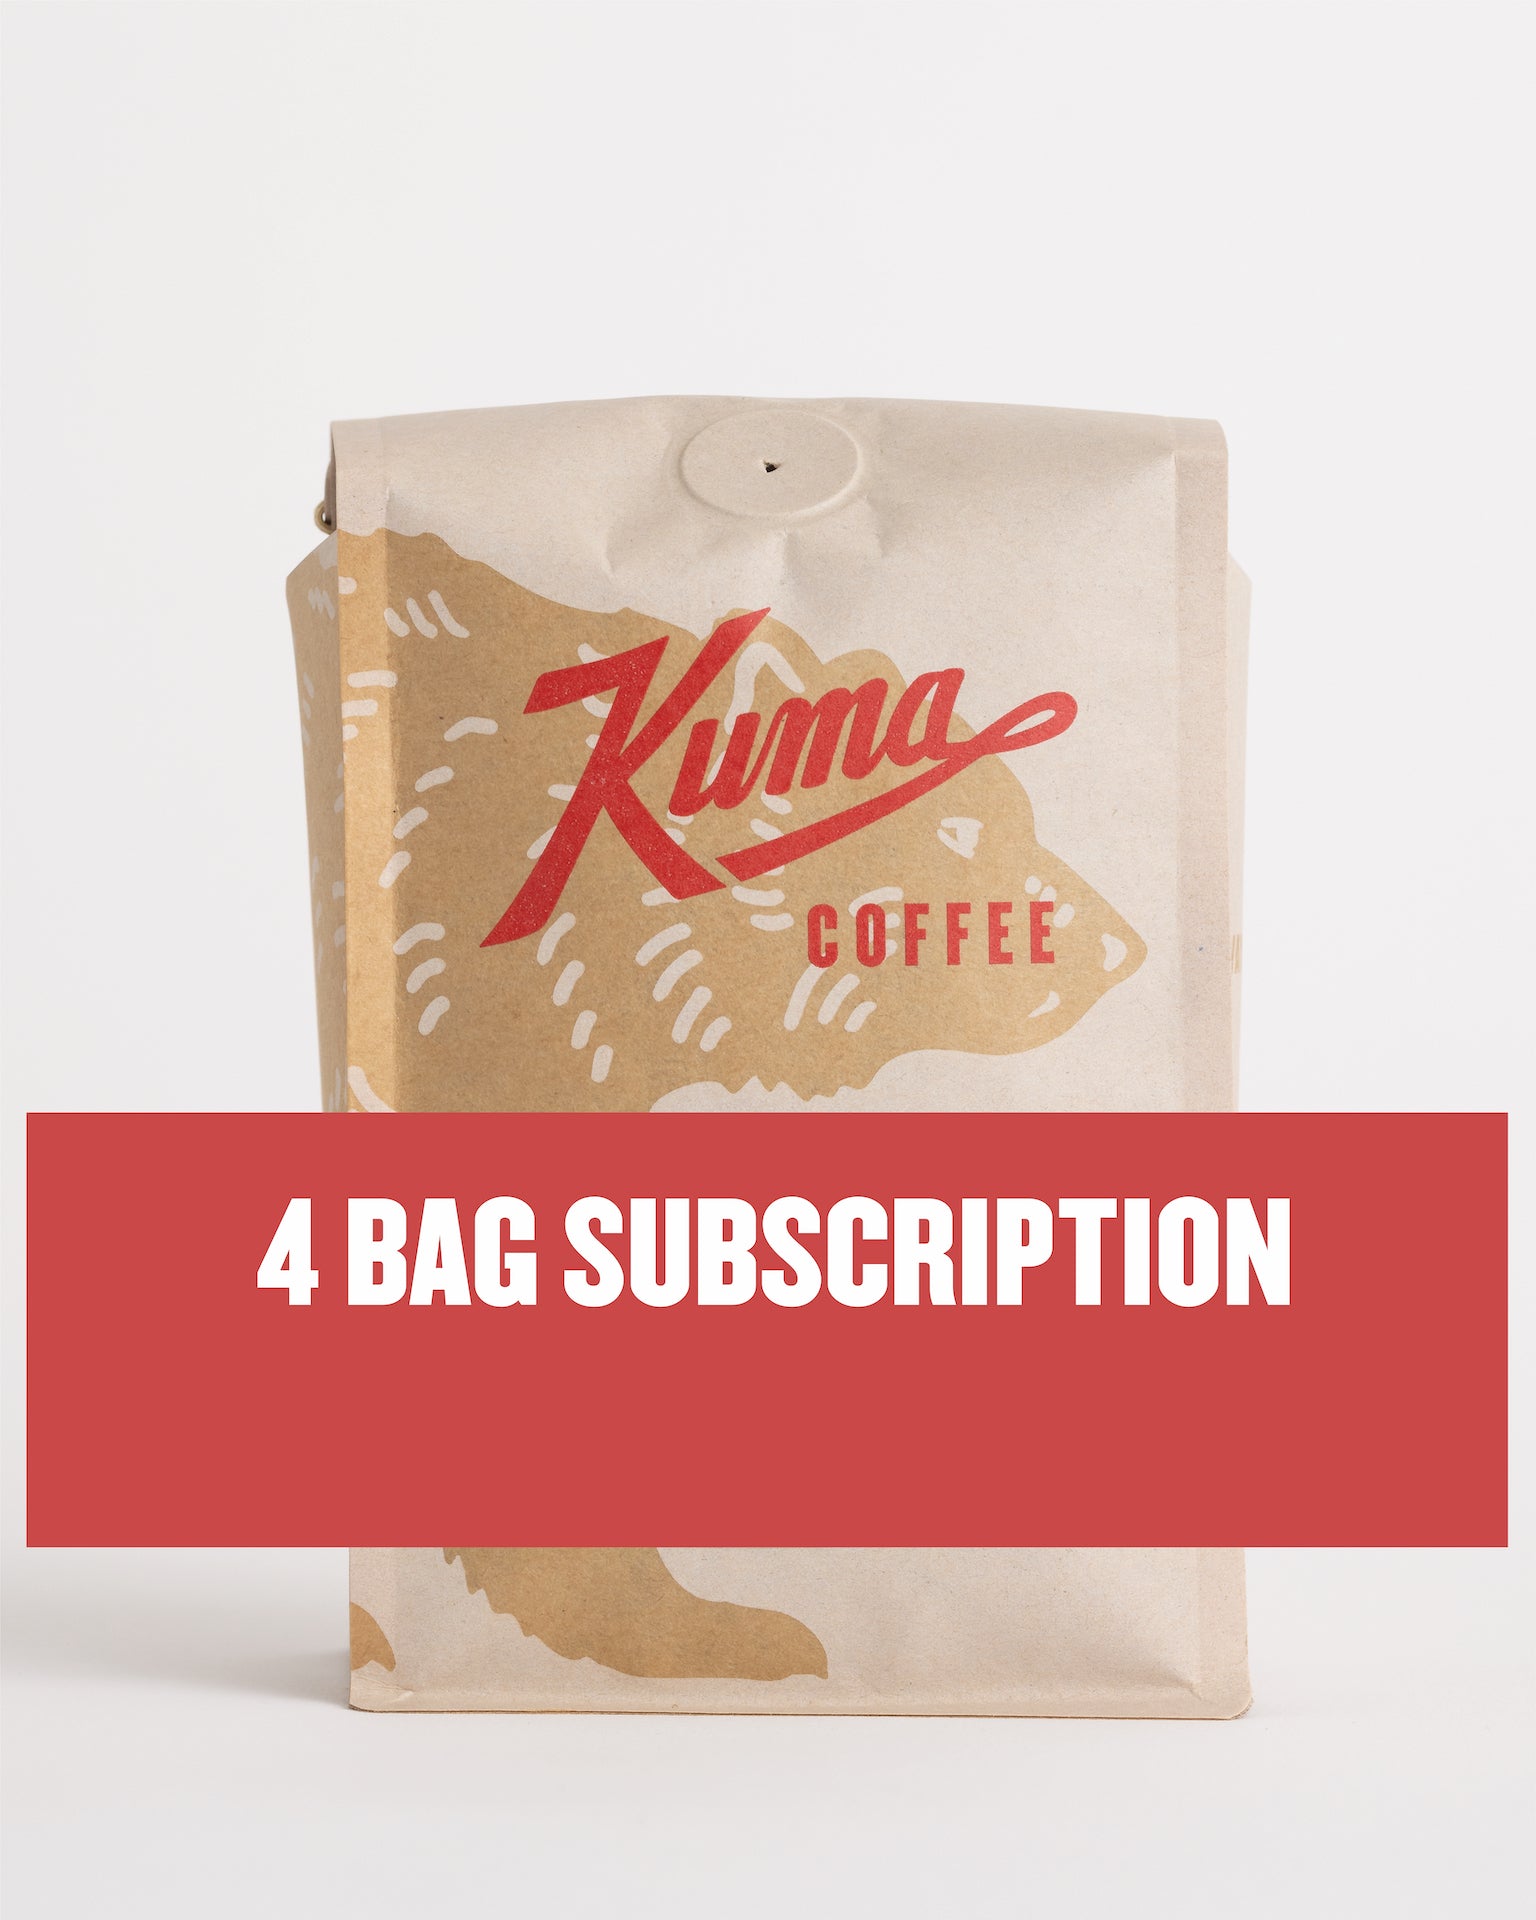 specialty coffee subscription, showing craft coffee bag with 4 bag coffee subscription banner